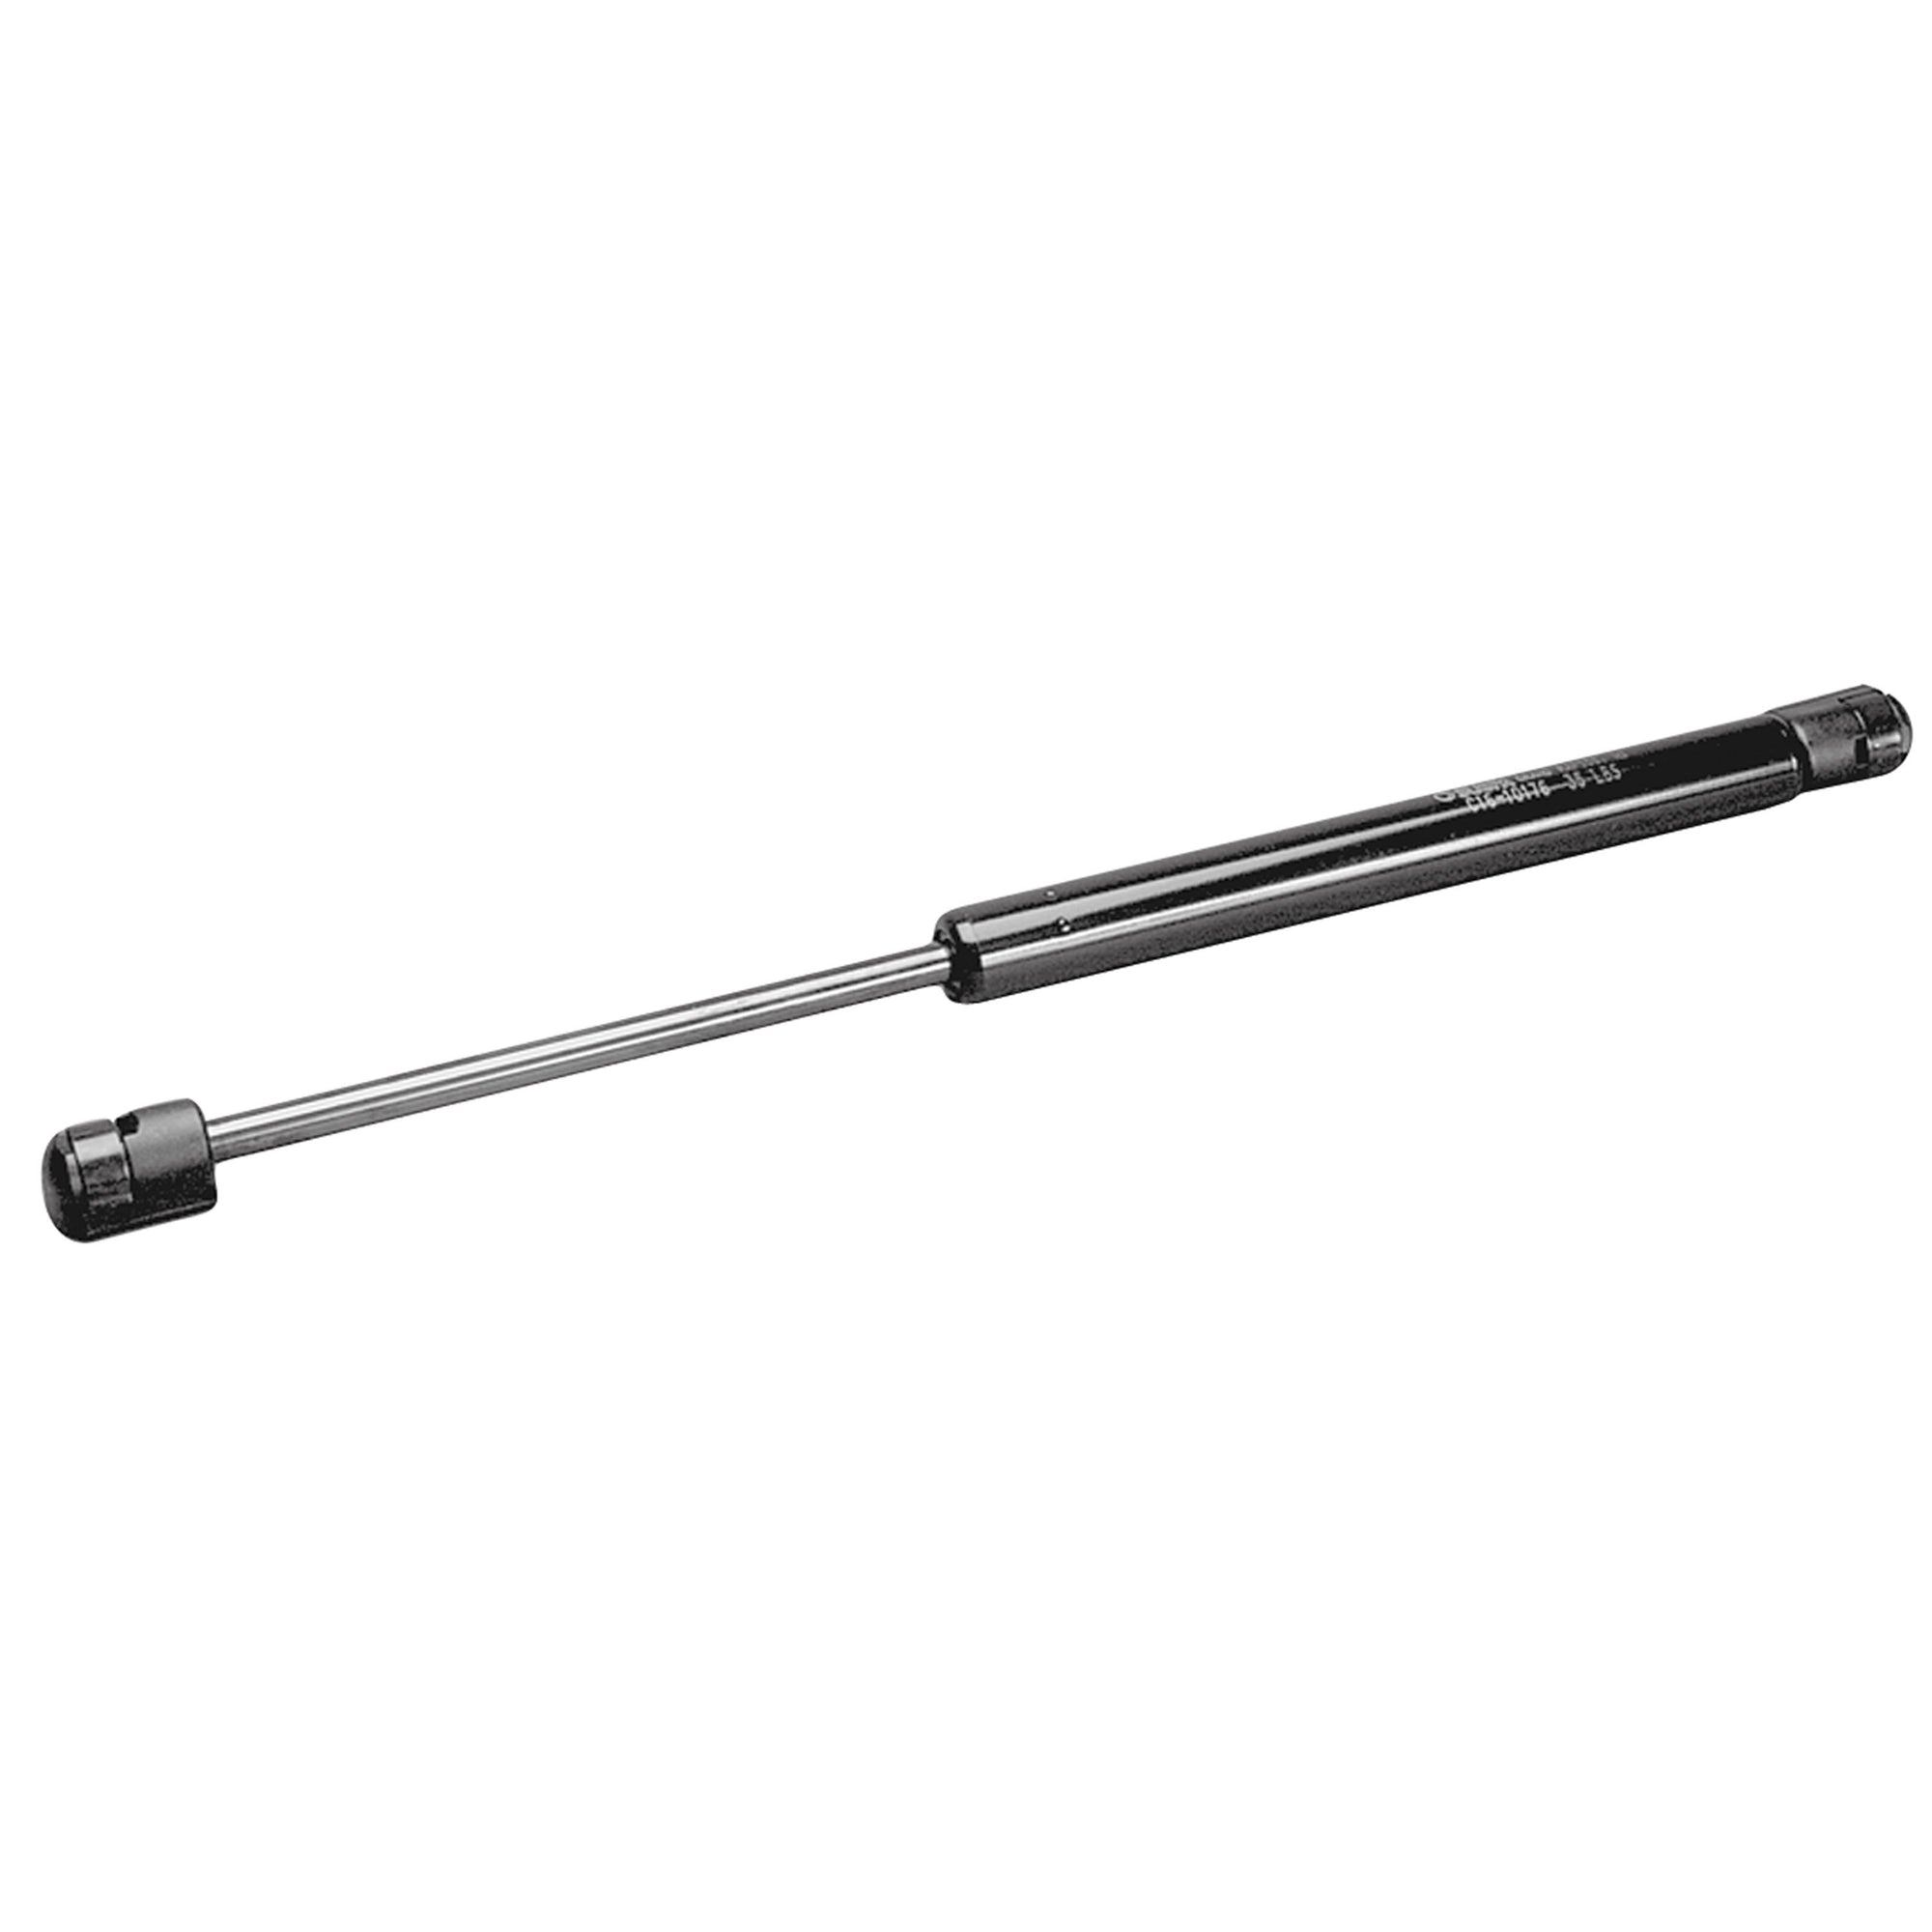 AP Products 010-173 Gas Spring - 13.98" Ext Length, 5.47" Stroke Rod Length, 40 lb. P1 Force